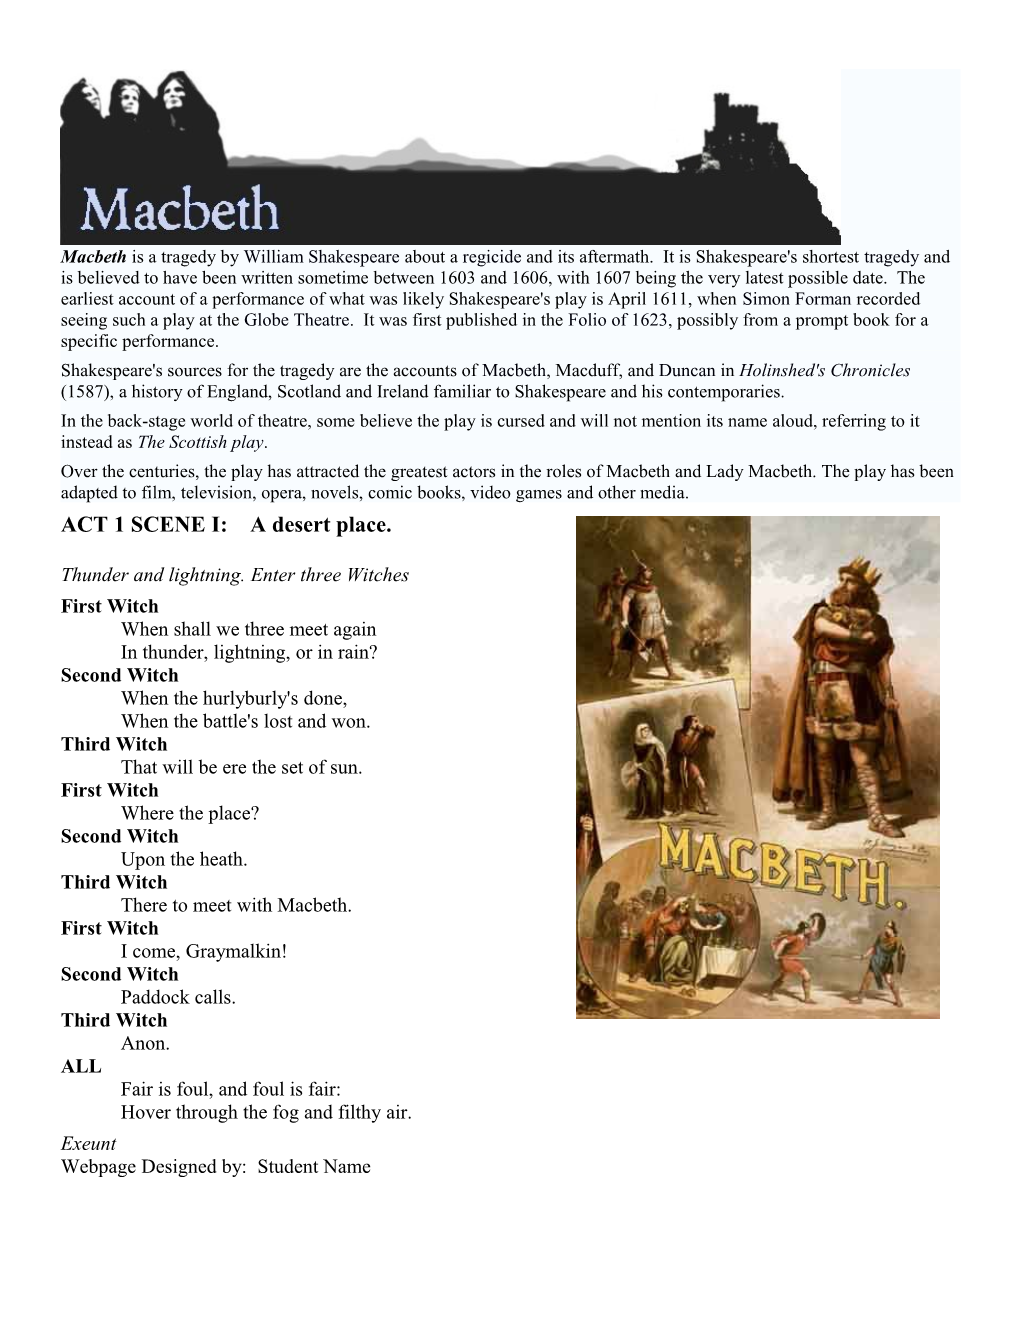 Shakespeare's Sources for the Tragedy Are the Accounts of Macbeth, Macduff, and Duncan